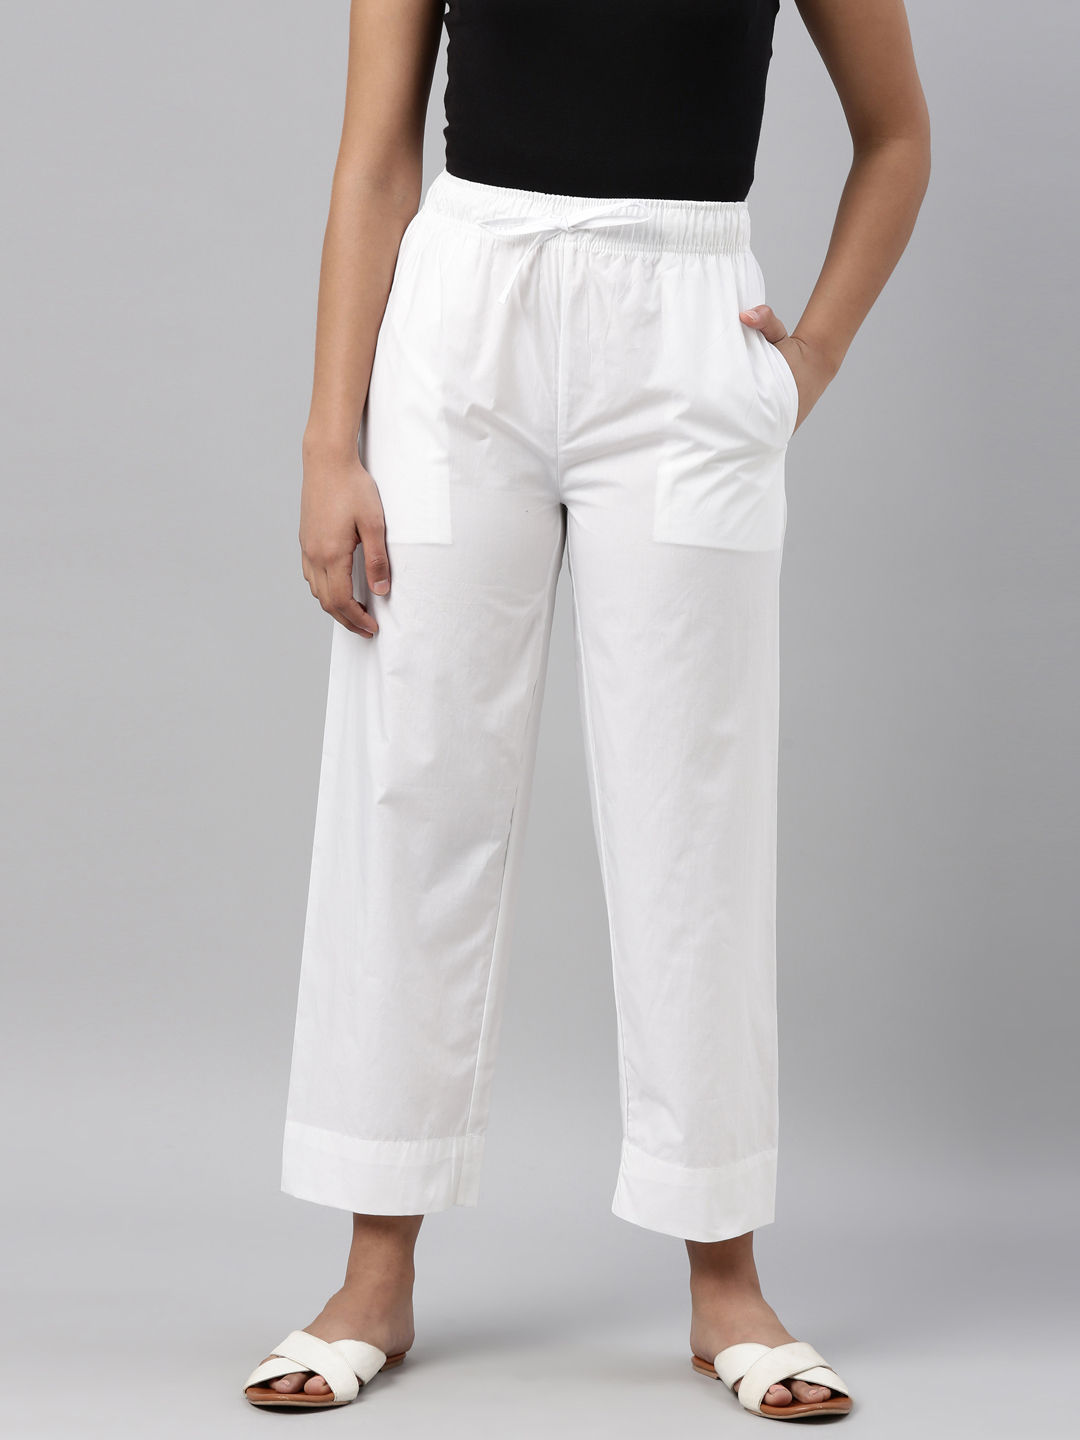 Buy WIDE LEGGED CASUAL WHITE TROUSER for Women Online in India